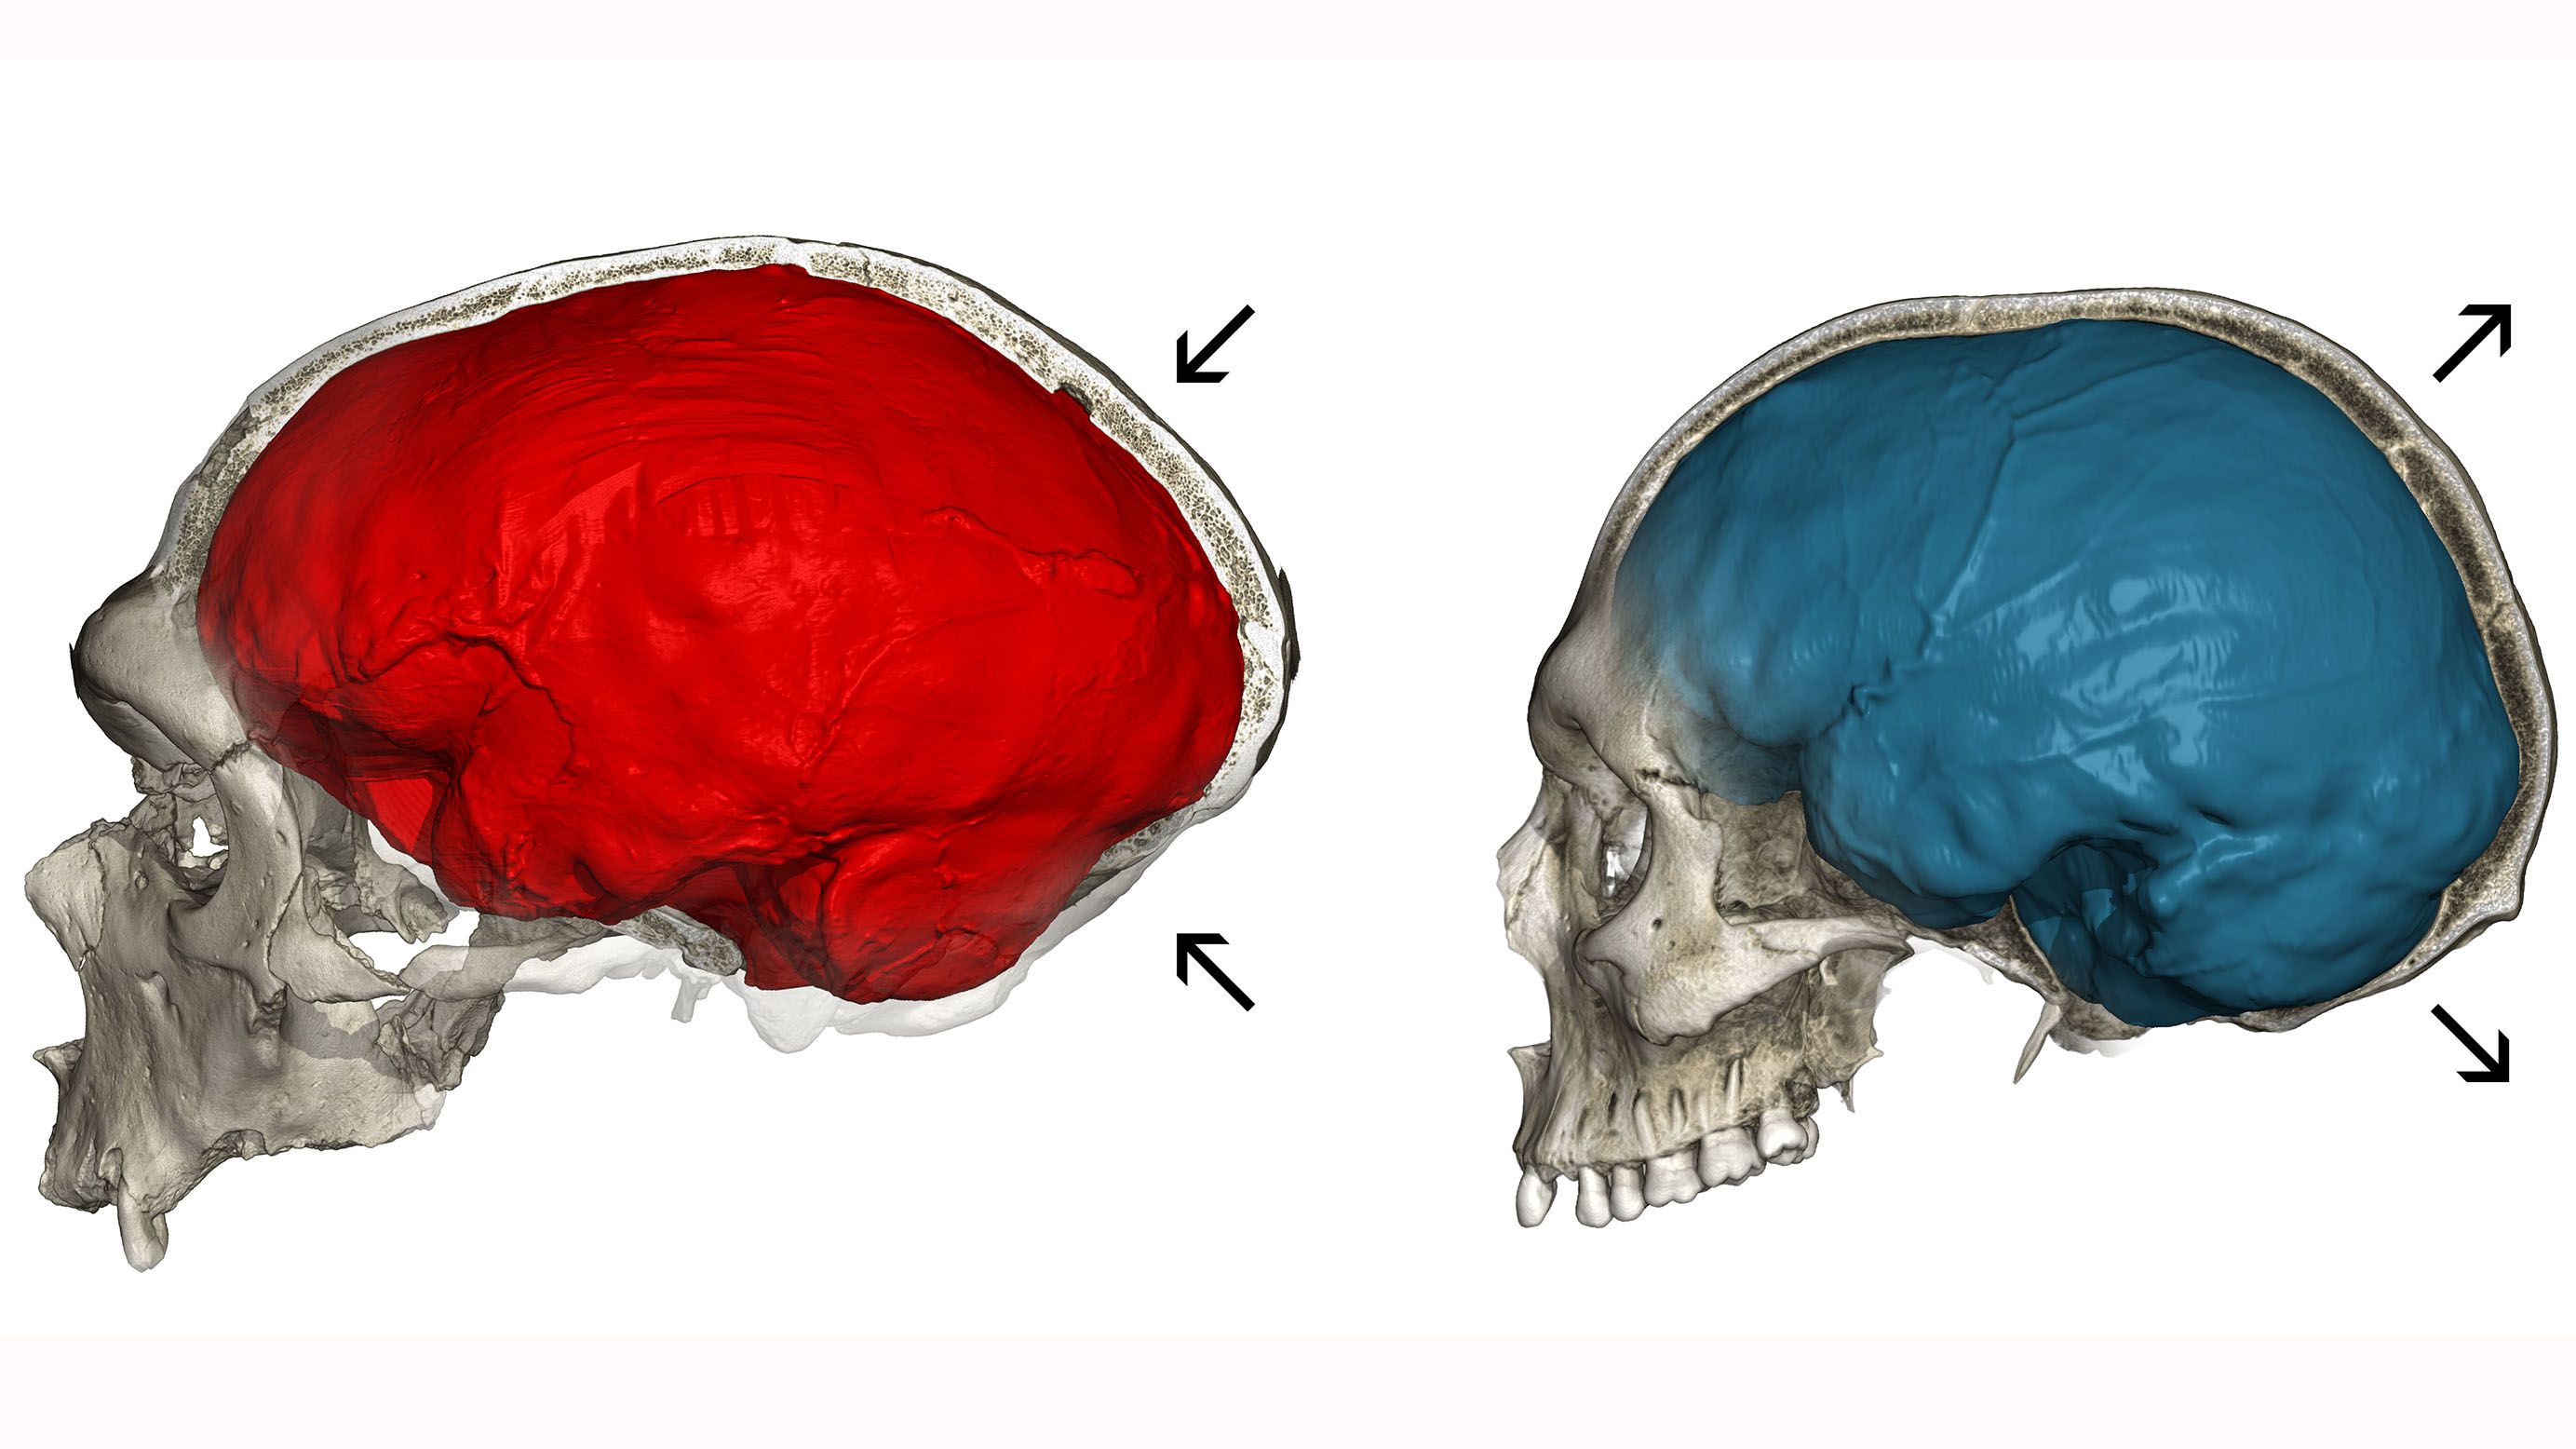 Neanderthal genes could explain the shape of our skulls, study